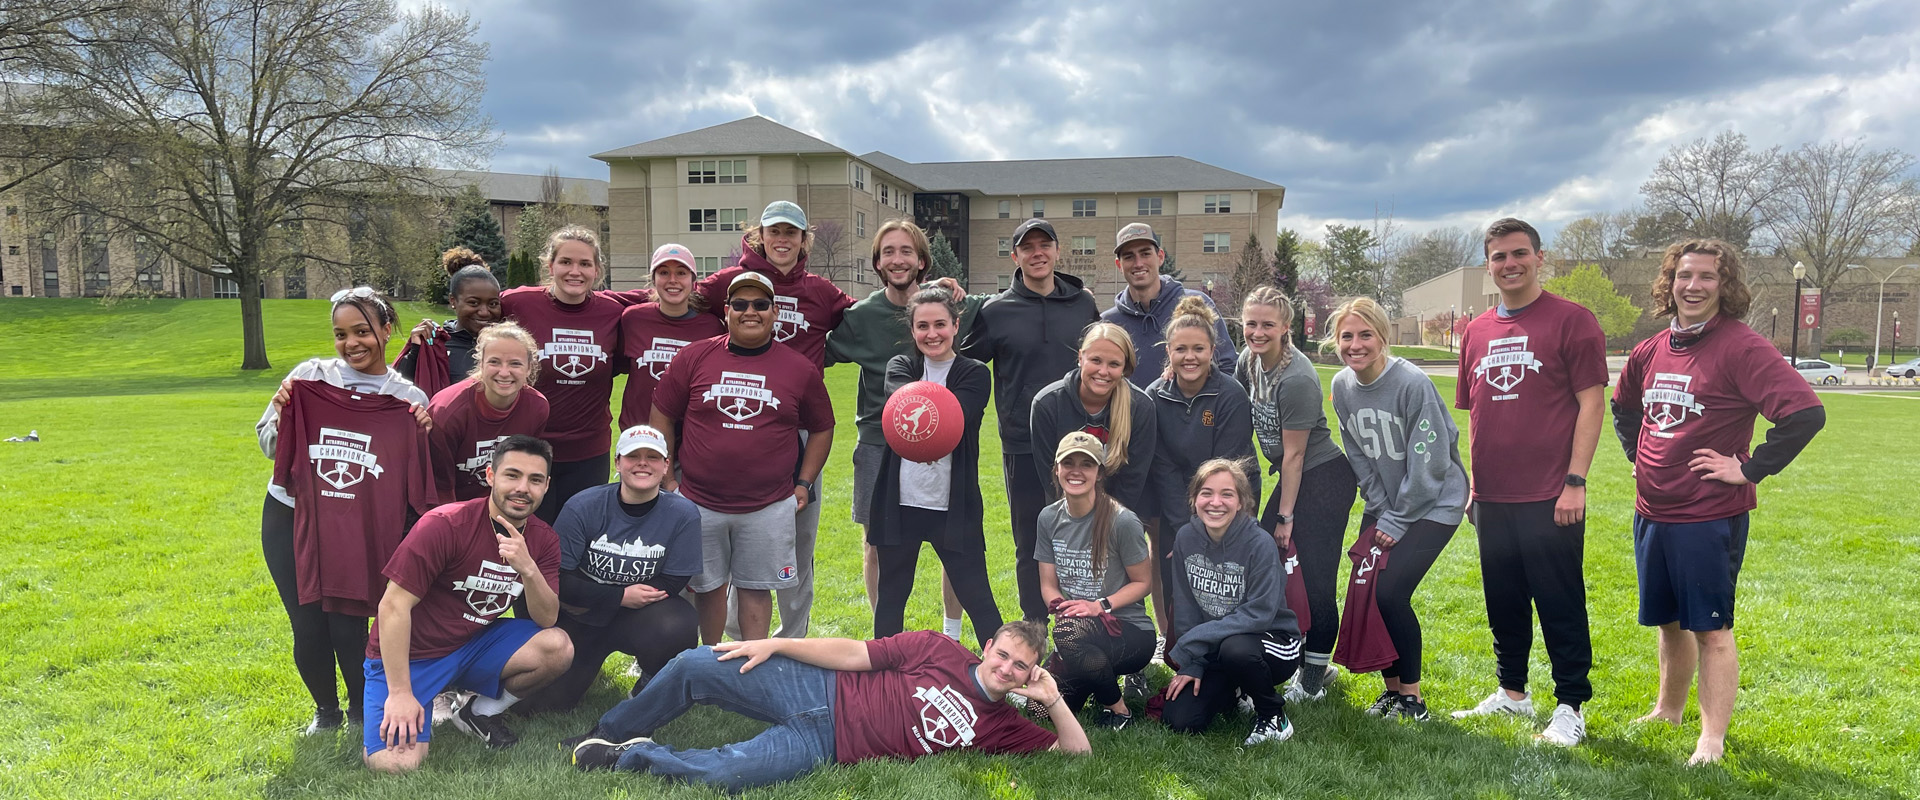 group photo of Walsh student intramural kickball team